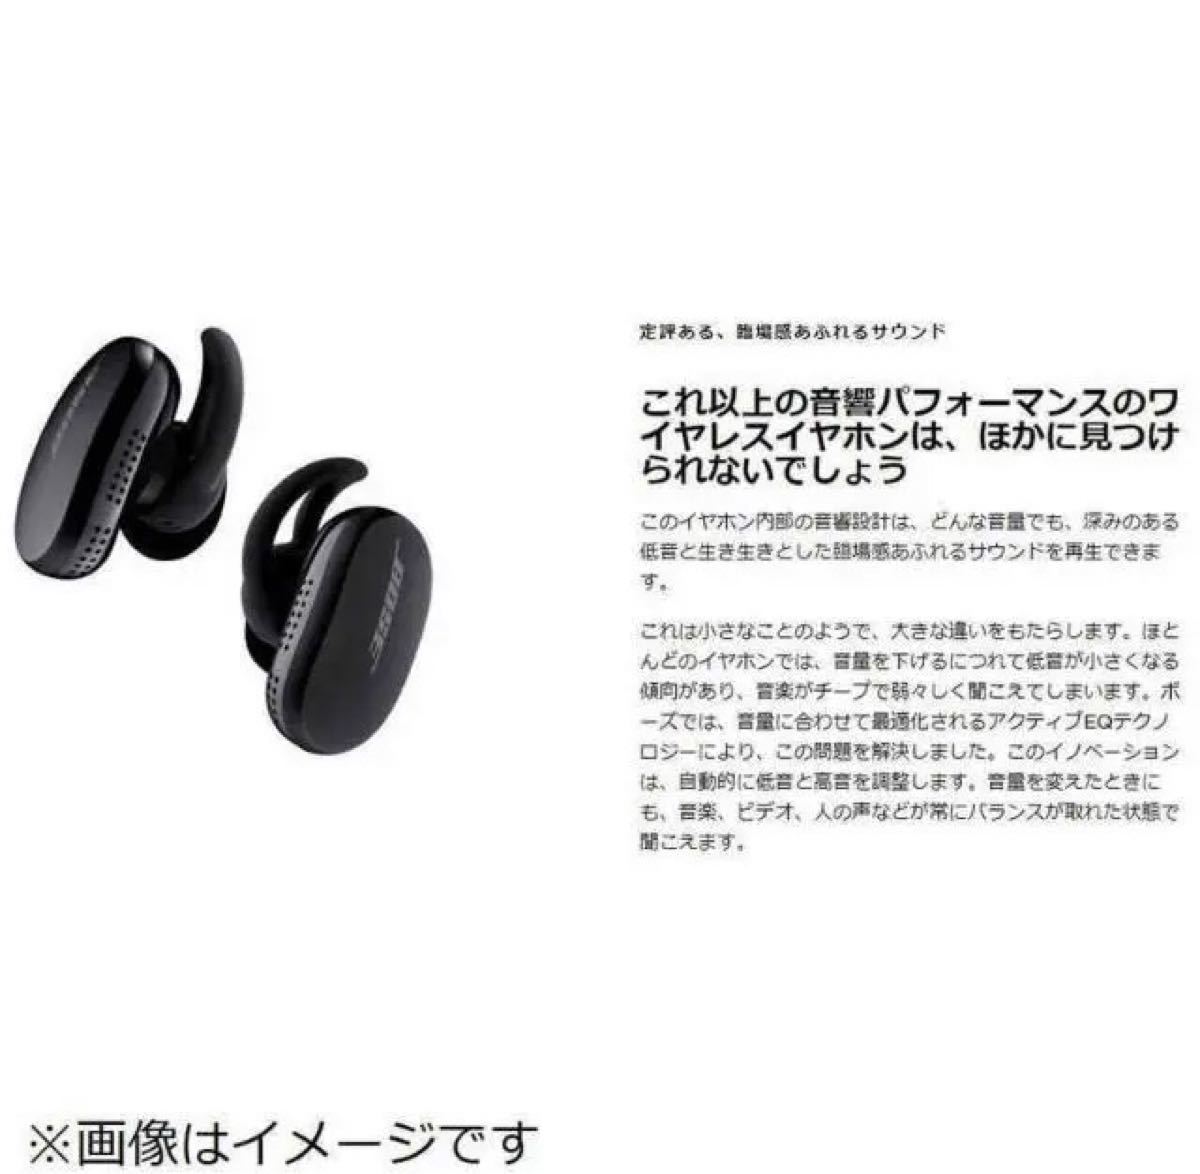 PayPayフリマ｜【新品未開封】Bose QuietComfort Earbuds ソープ 